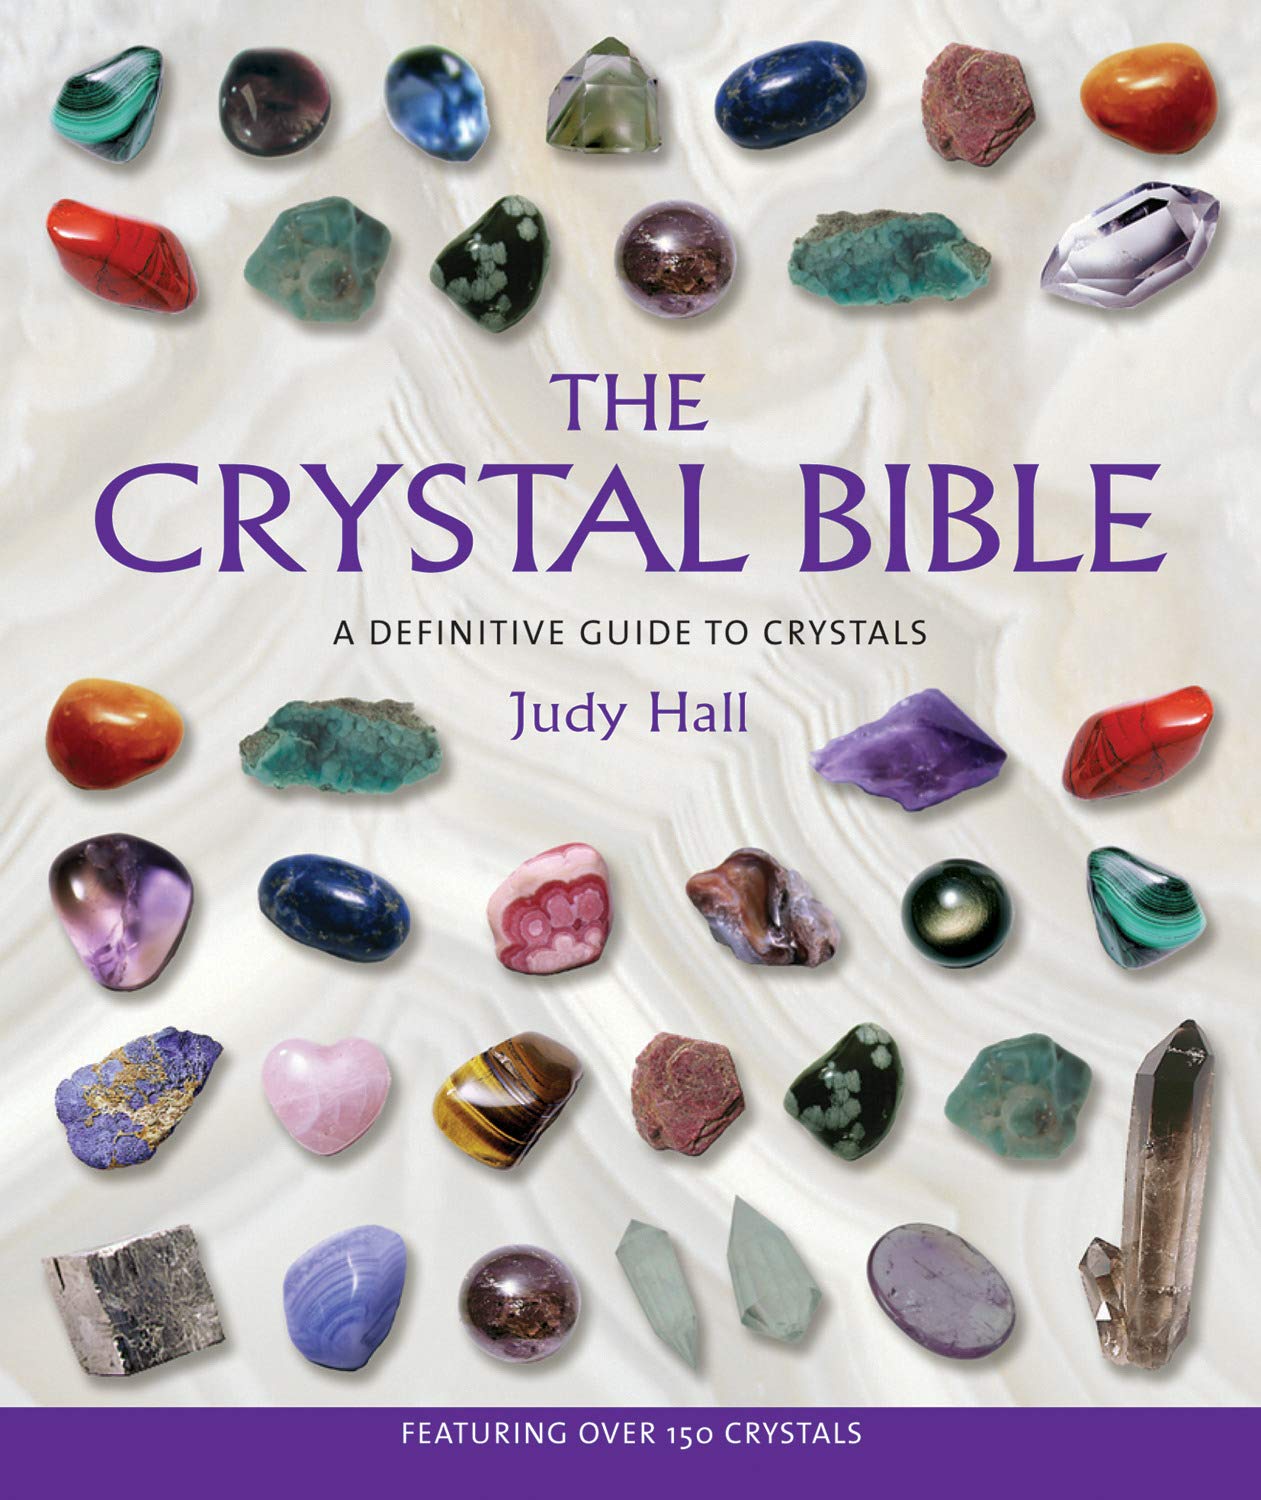 The Crystal Bible (eBook) by Judy Hall $1.99